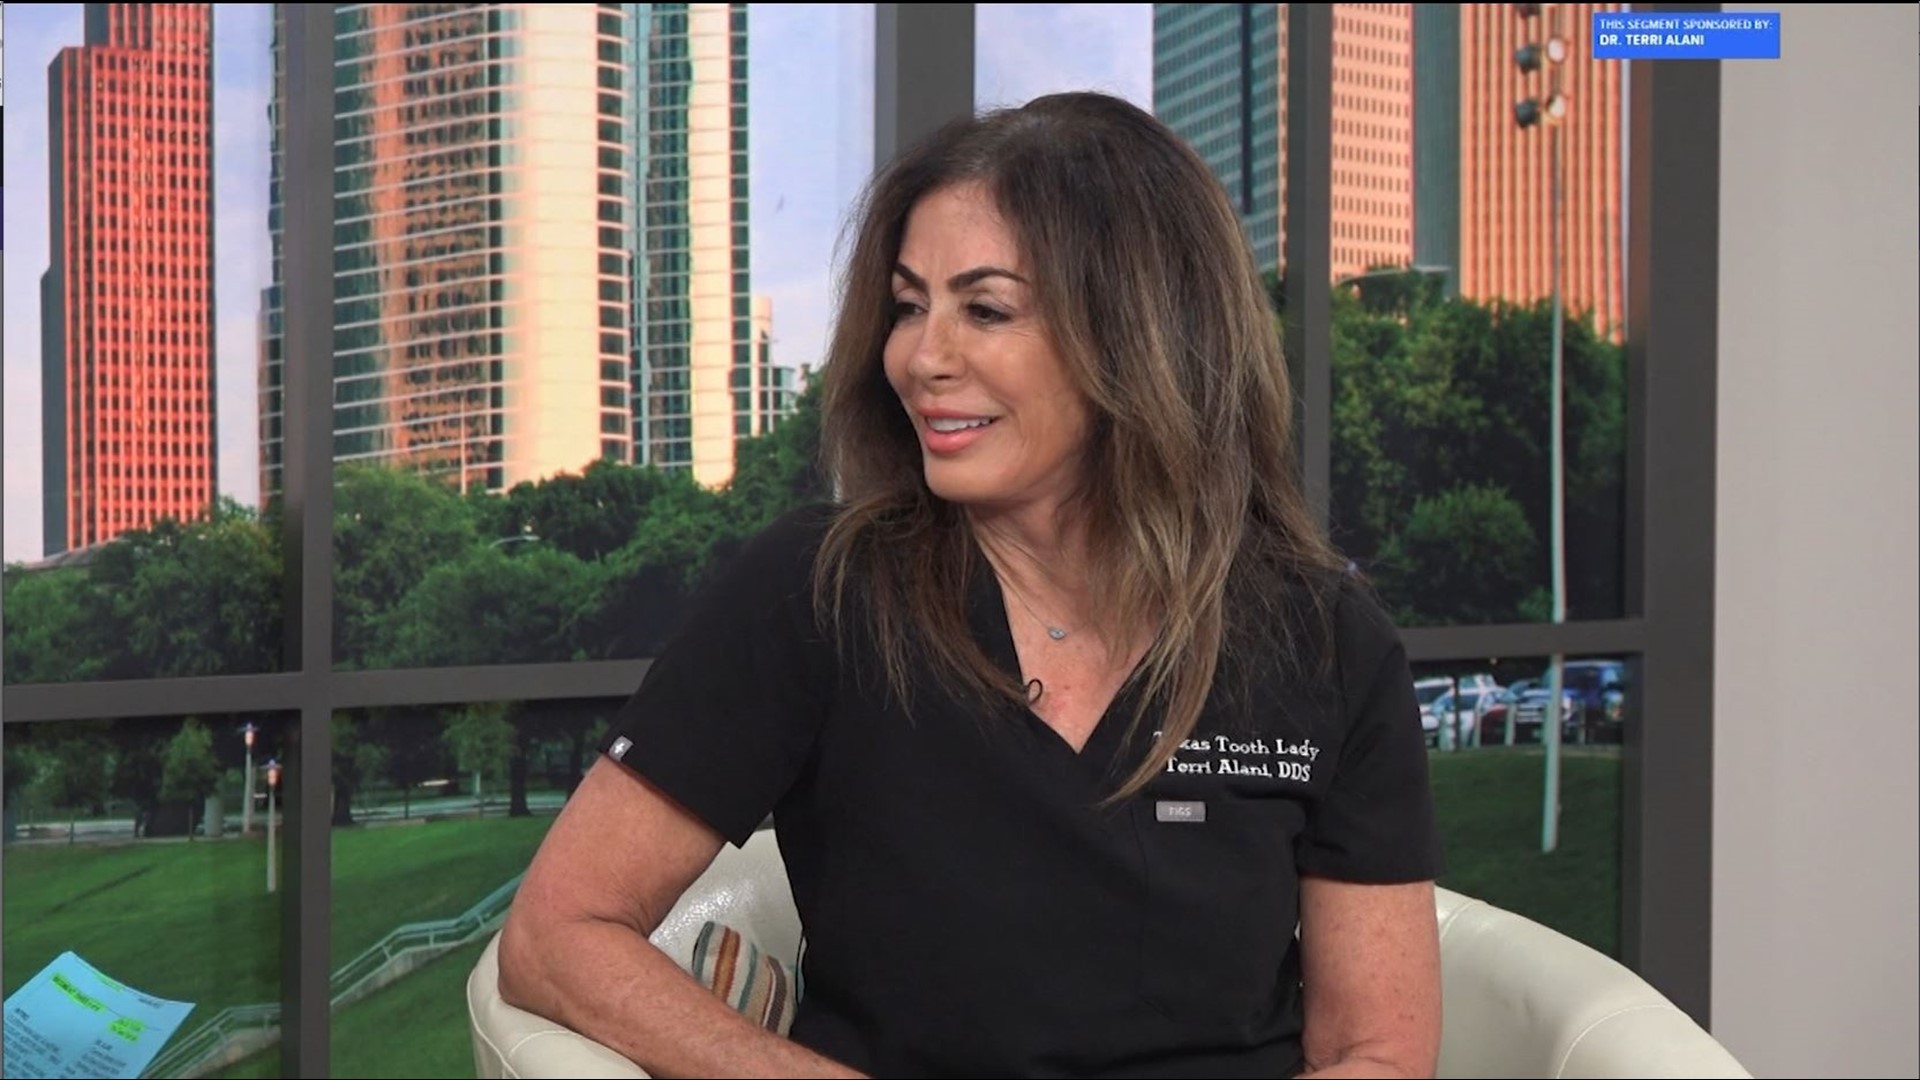 Dr. Terri Alani, a.k.a. The Texas Tooth Lady, shares easy ways to upgrade your smile without breaking the bank.